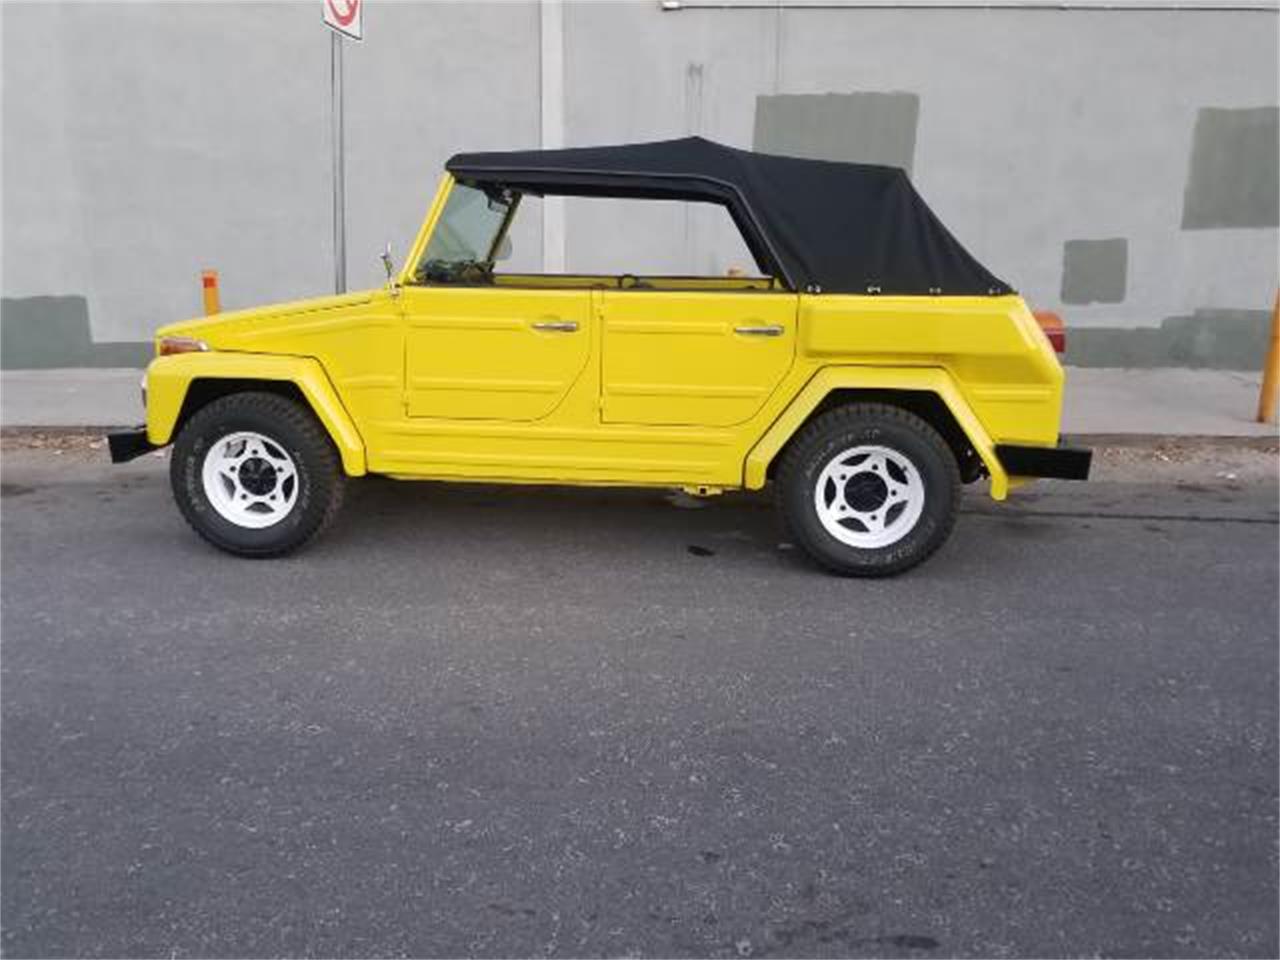 For Sale at Auction: 1974 Volkswagen Thing in Palm Springs, California for sale in Palm Springs, CA